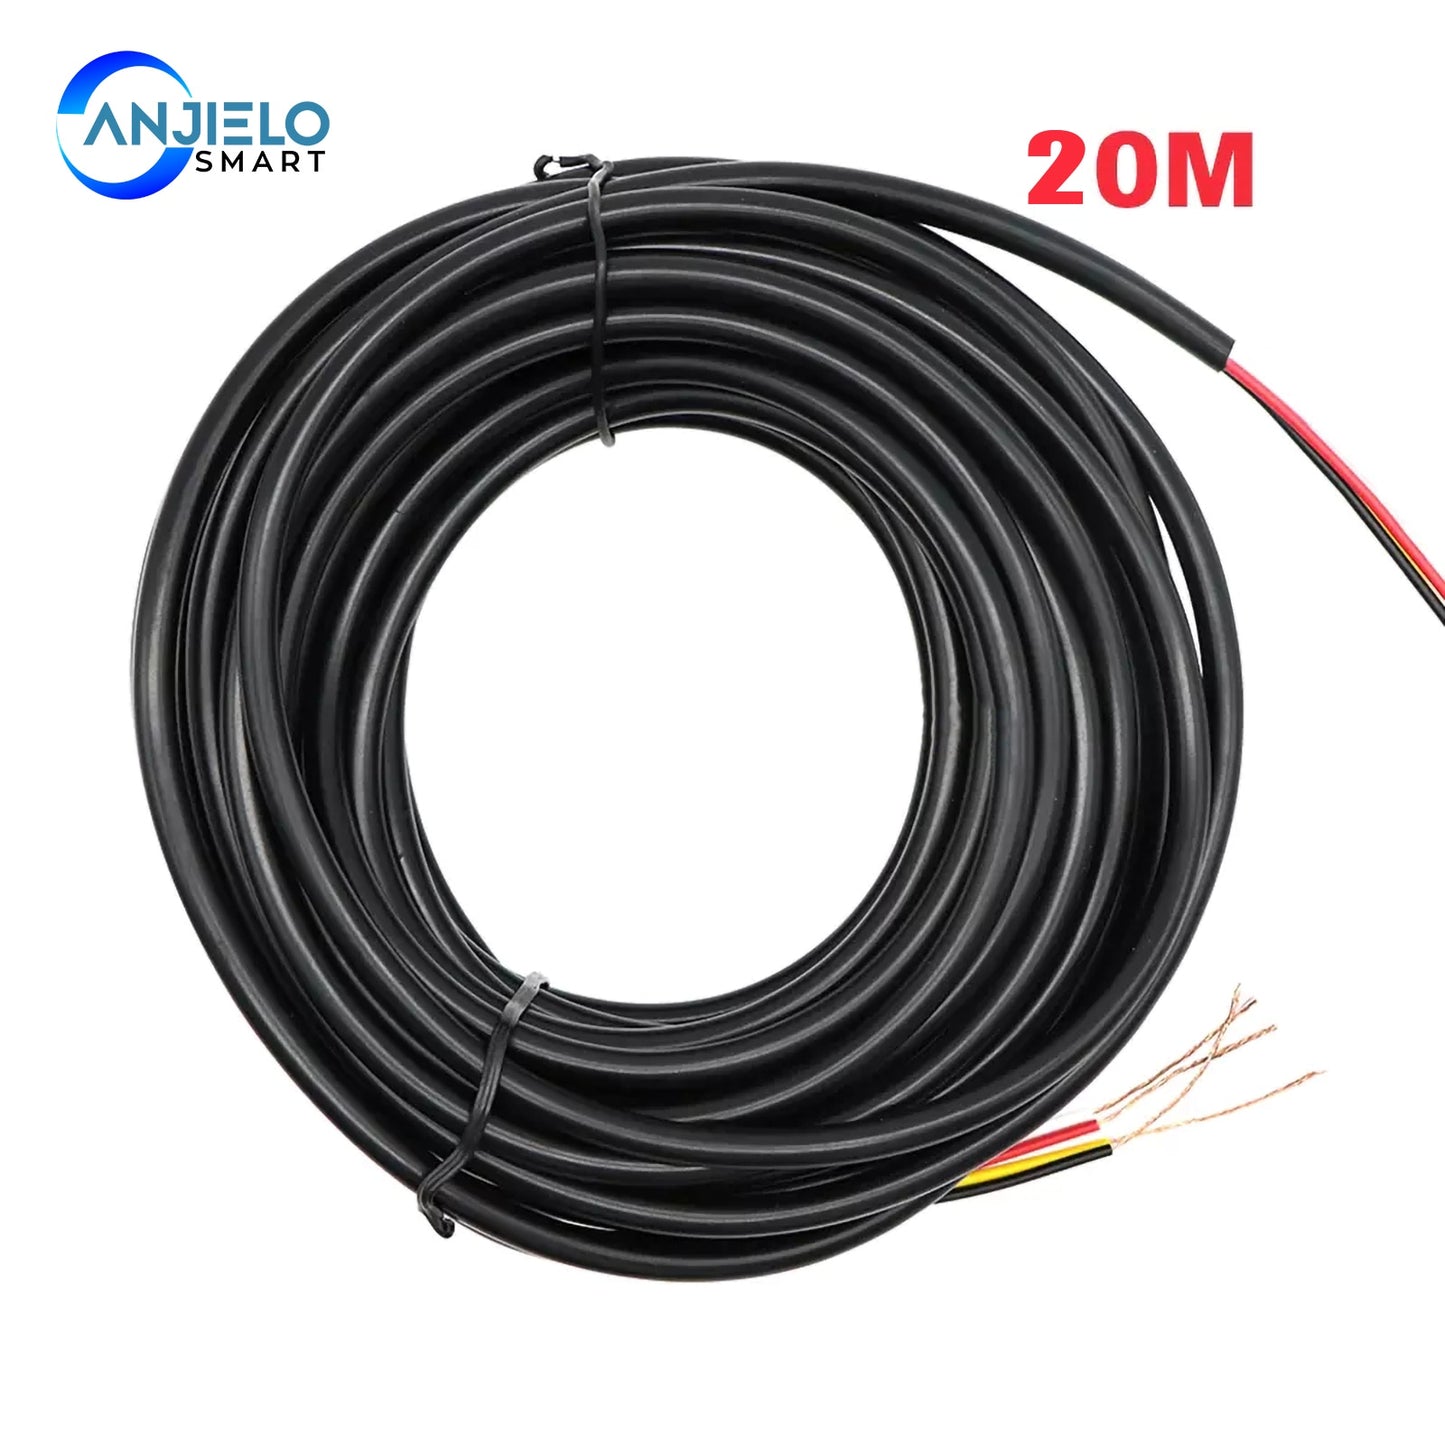 Anjielosmart 20M Video Extend Cable 4x0.2mm Tinned Copper Wire for Intercom